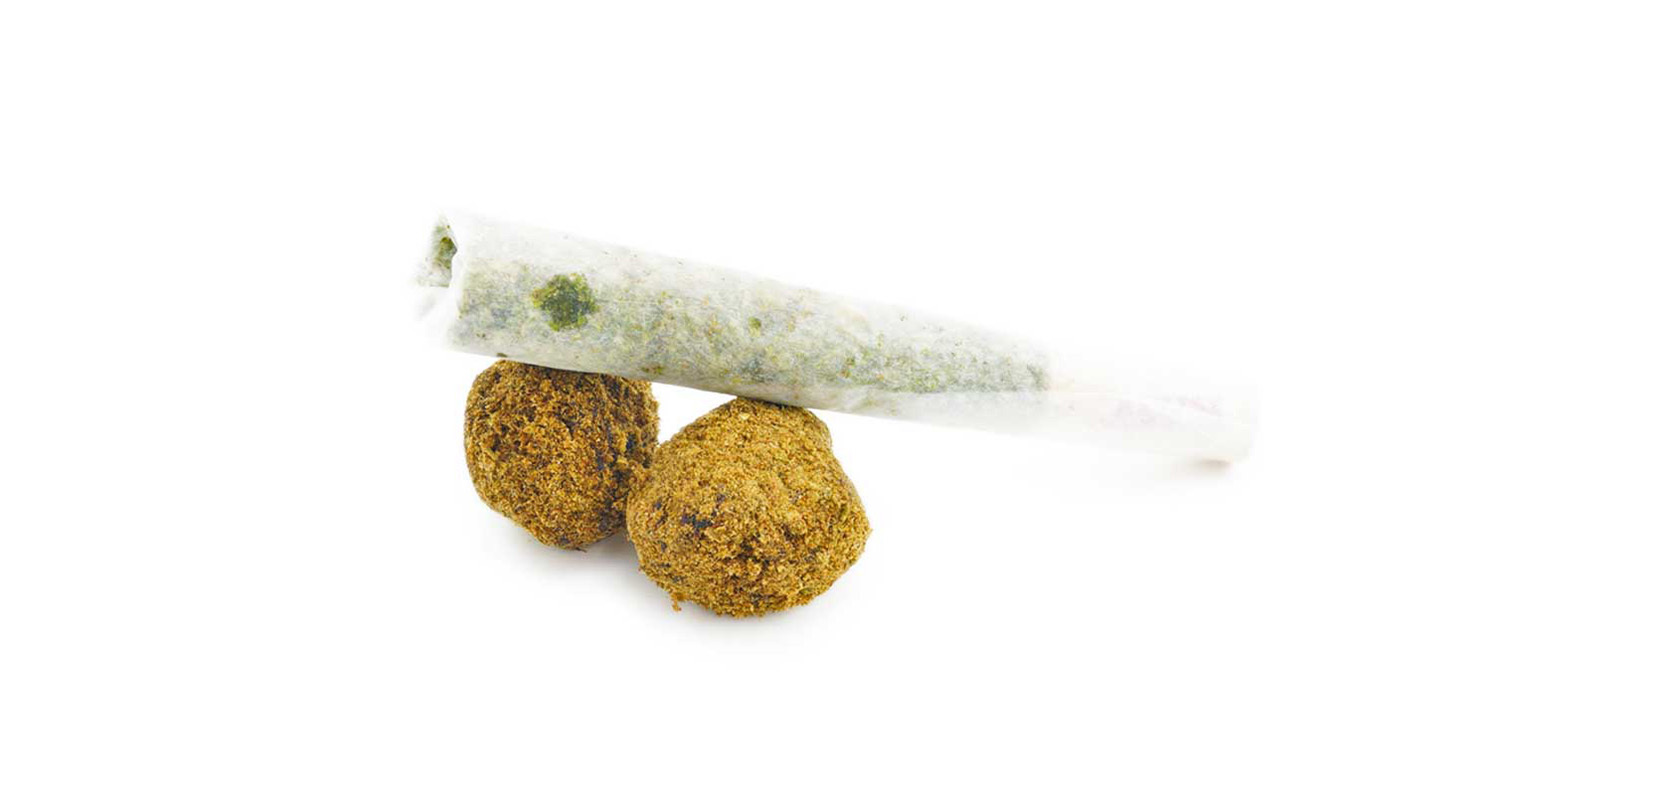 Pre-roll joint and moon rocks for sale. Online Dispensary Canada to order weed online. Weed Dispensary.